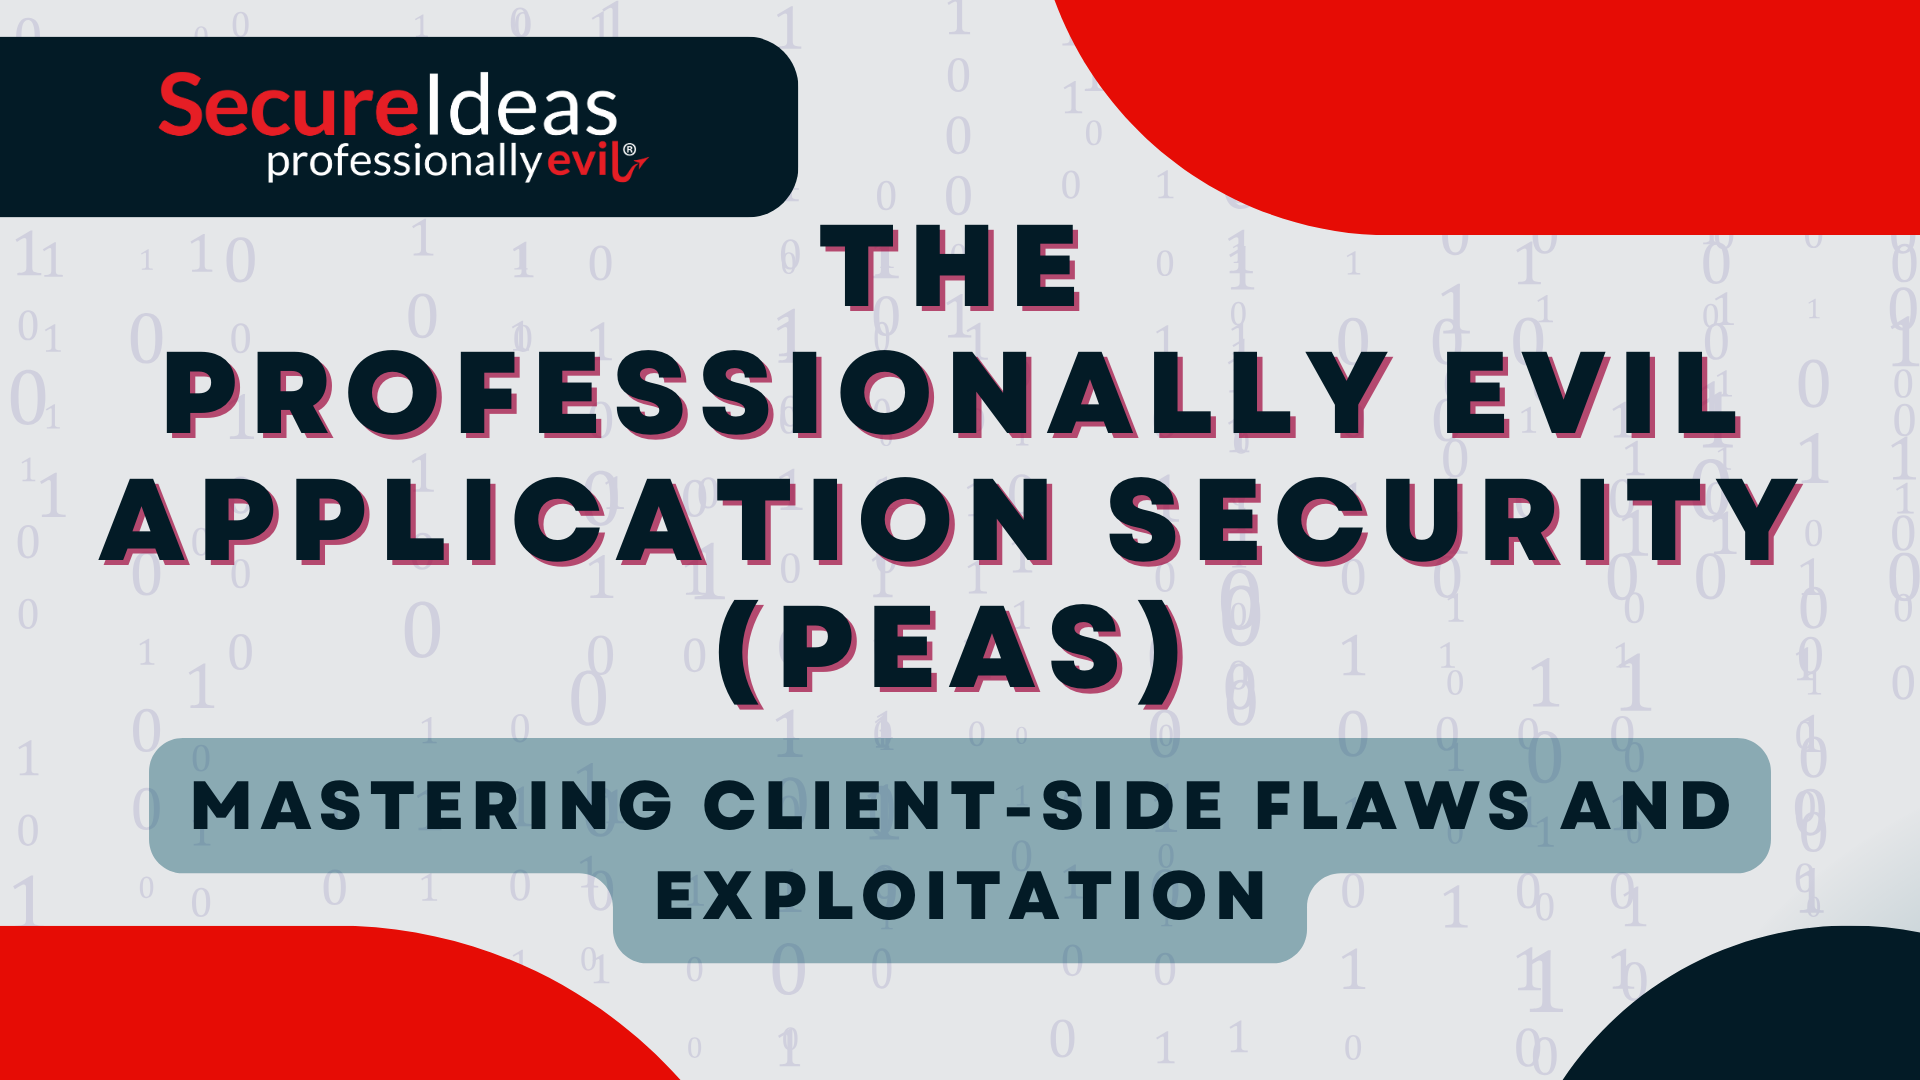 The Professionally Evil Application Security (PEAS) Mastering Client-Side Flaws and Exploitation